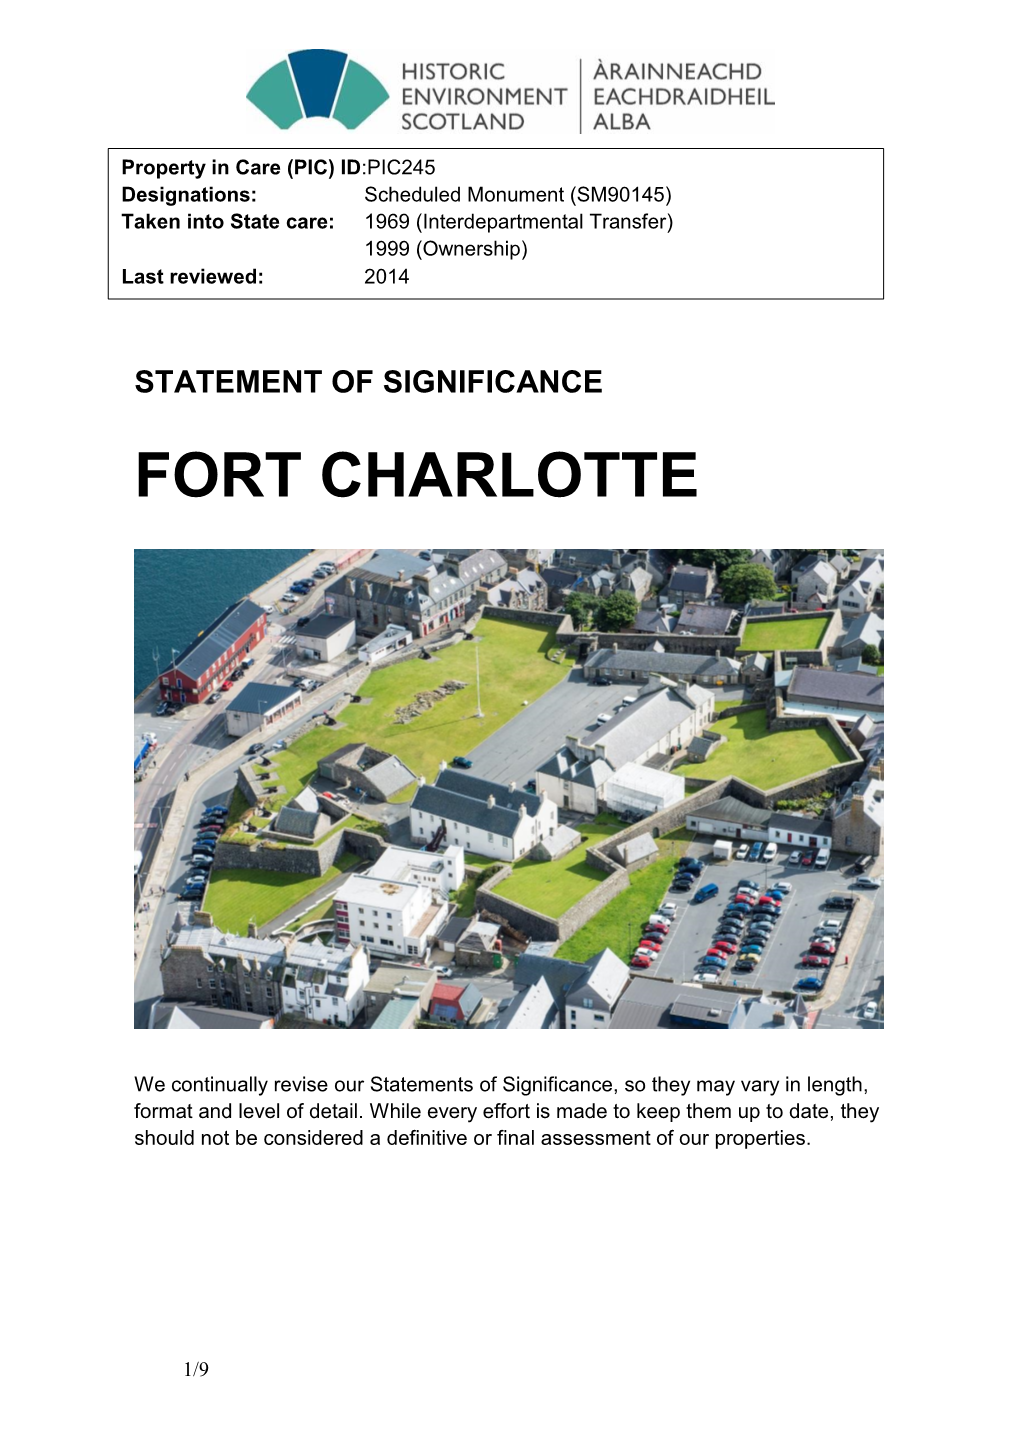 Fort Charlotte Statement of Significance